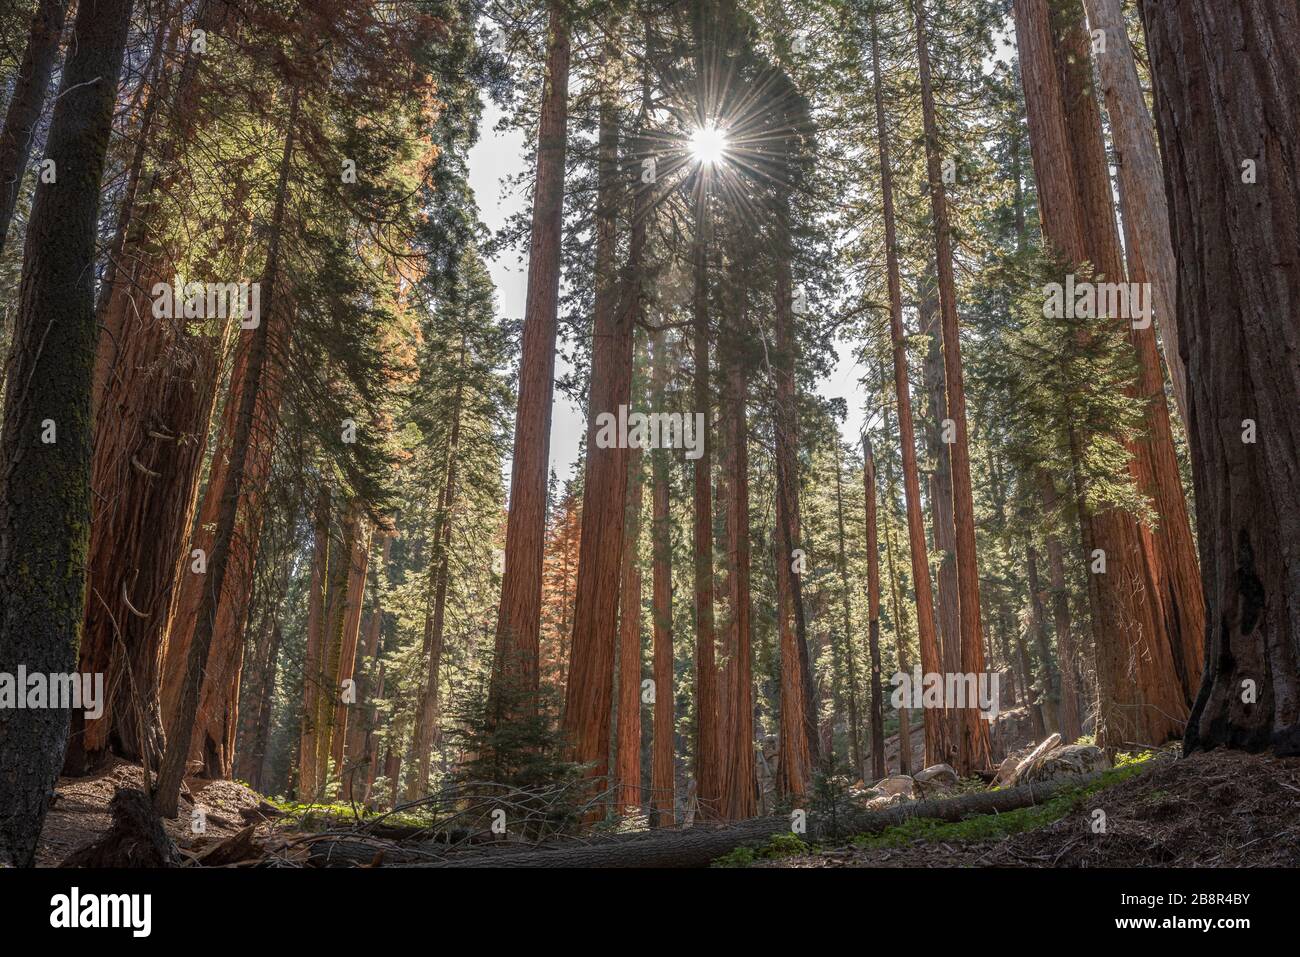 The grand sequoias tower over visitors to Sequoia National Park. Stock Photo